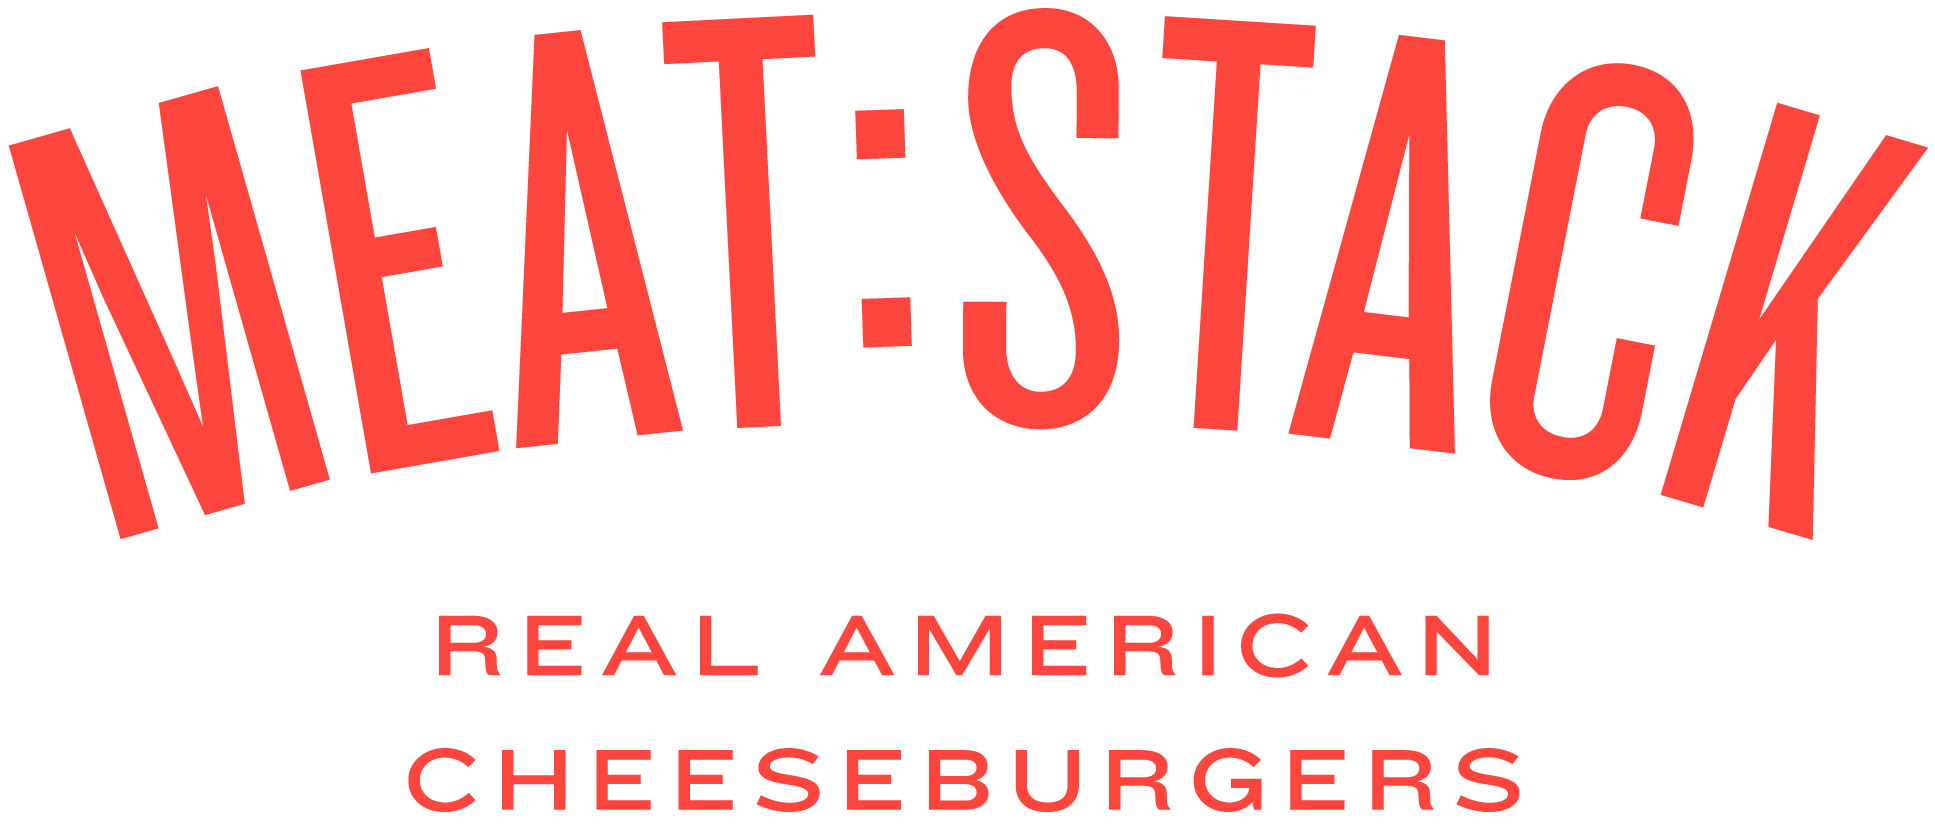 logo for Meat:Stack